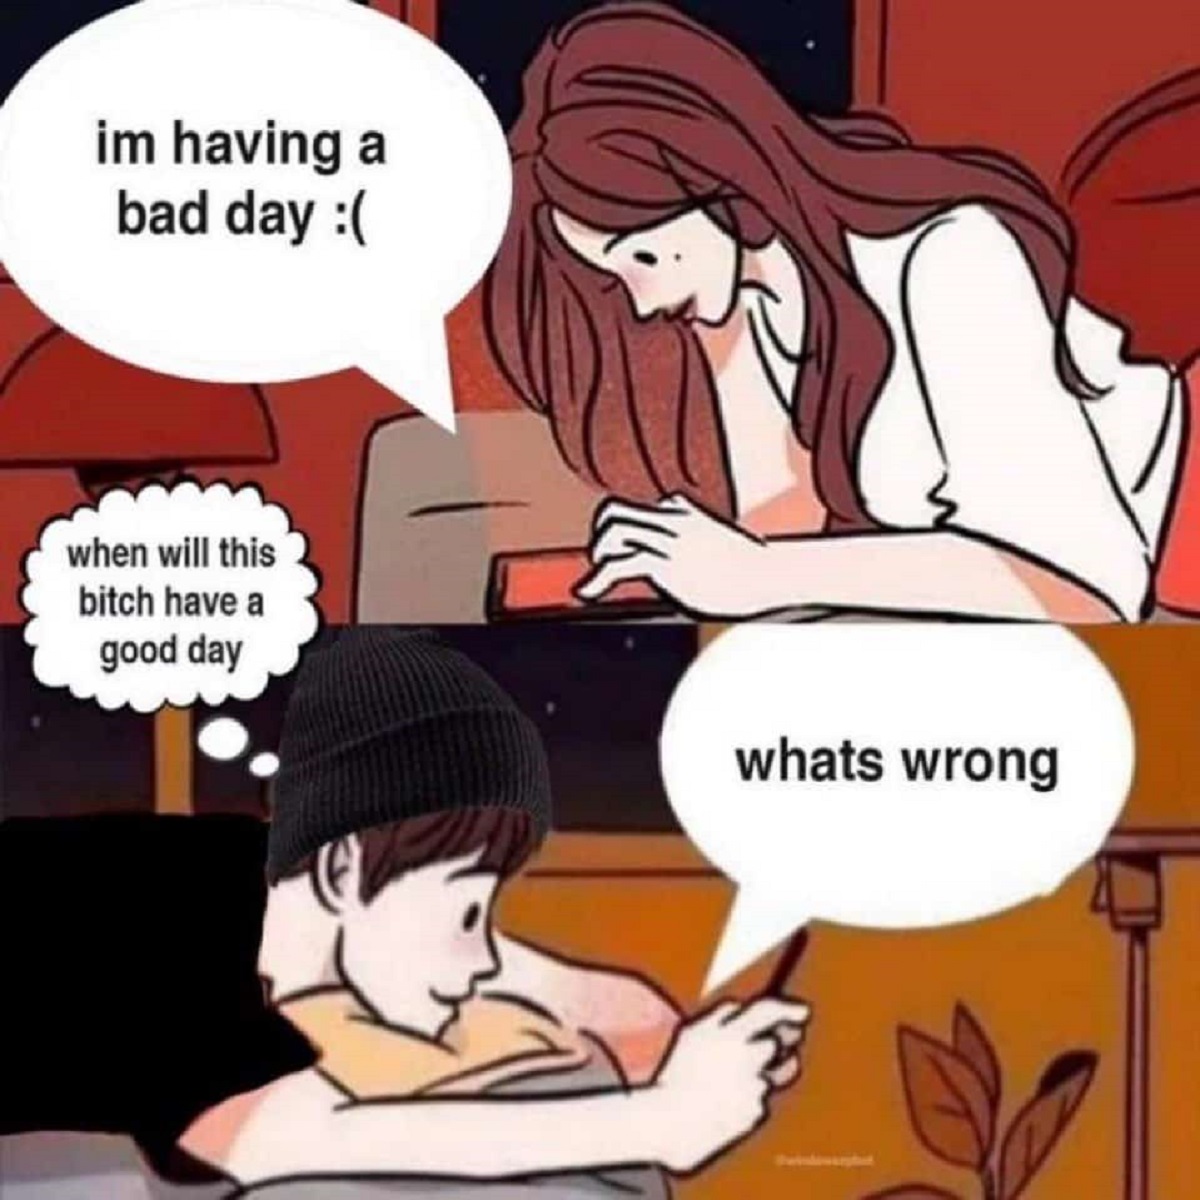 i m having a bad day meme - im having a bad day when will this bitch have a good day whats wrong